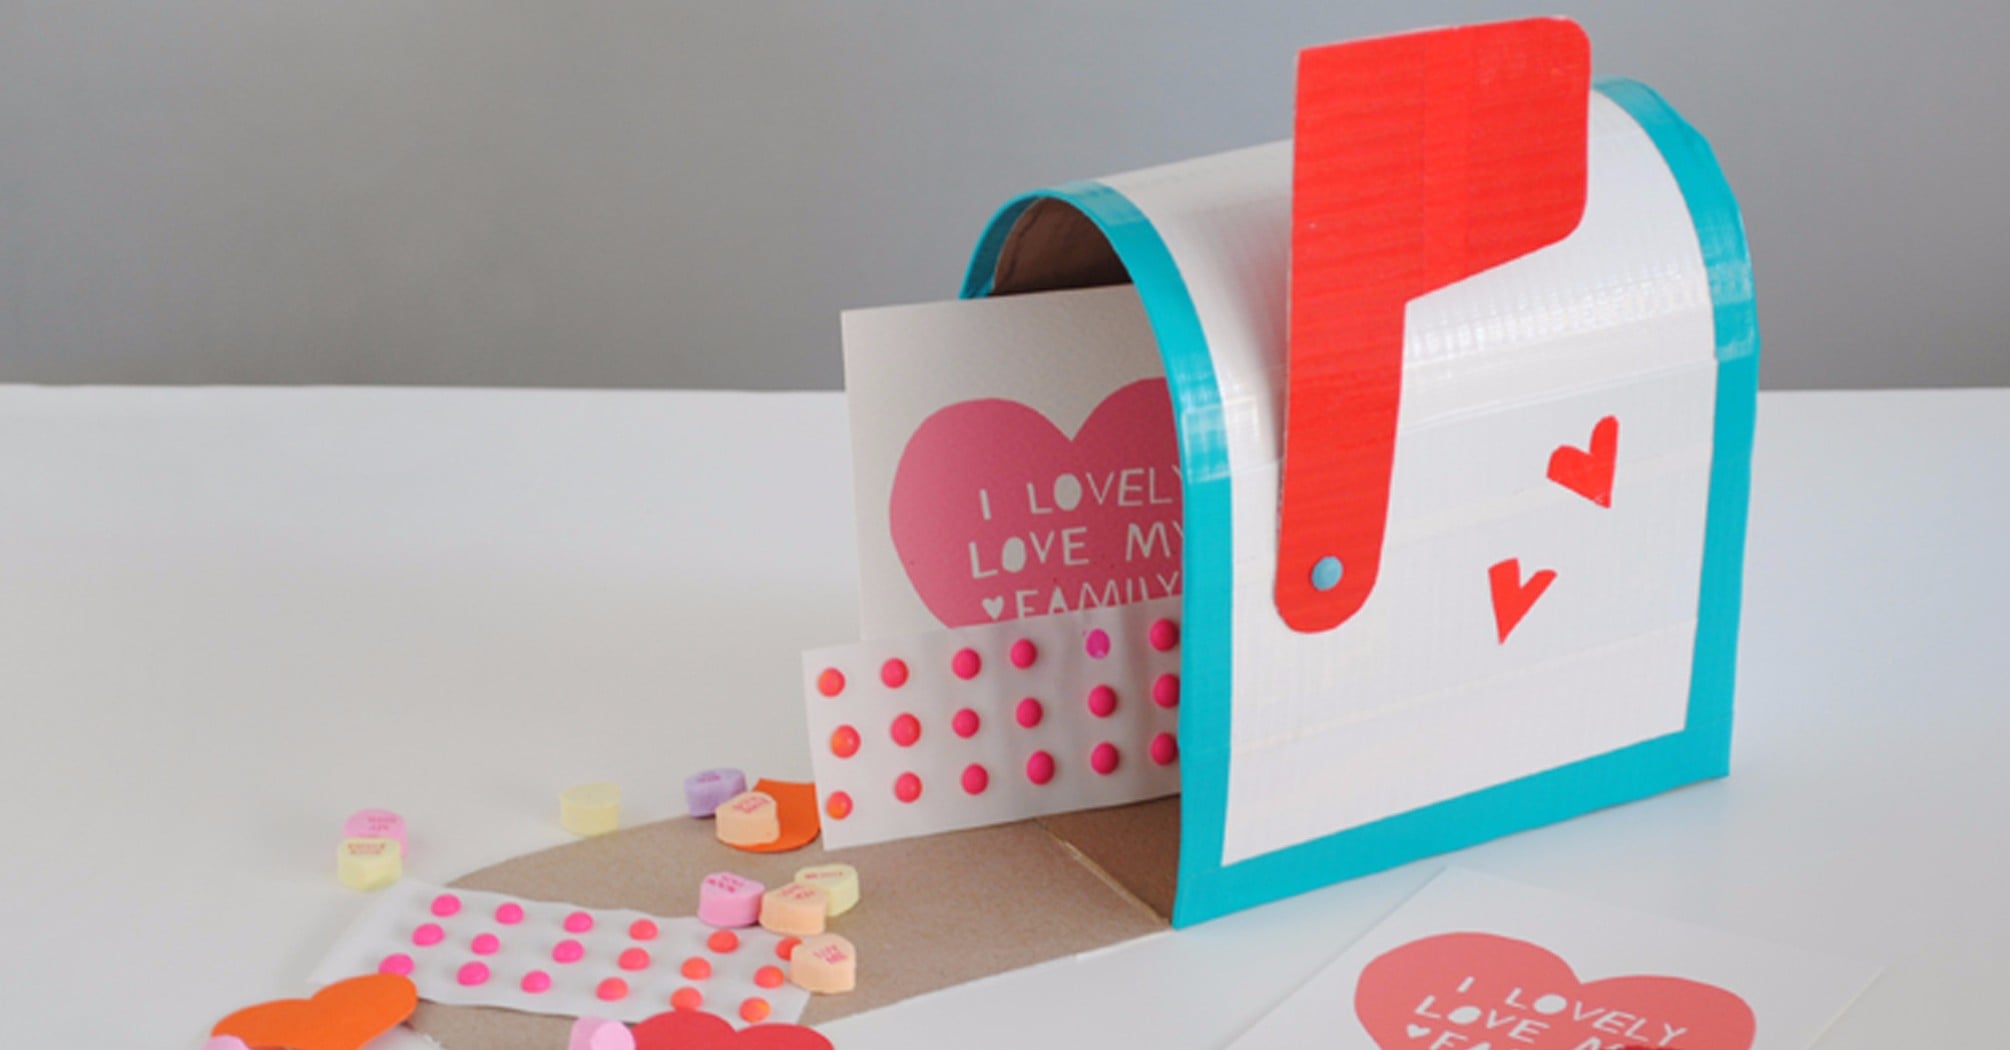 Fun Little Toys Valentine's Mailbox with 32 Animal Pattern Cards